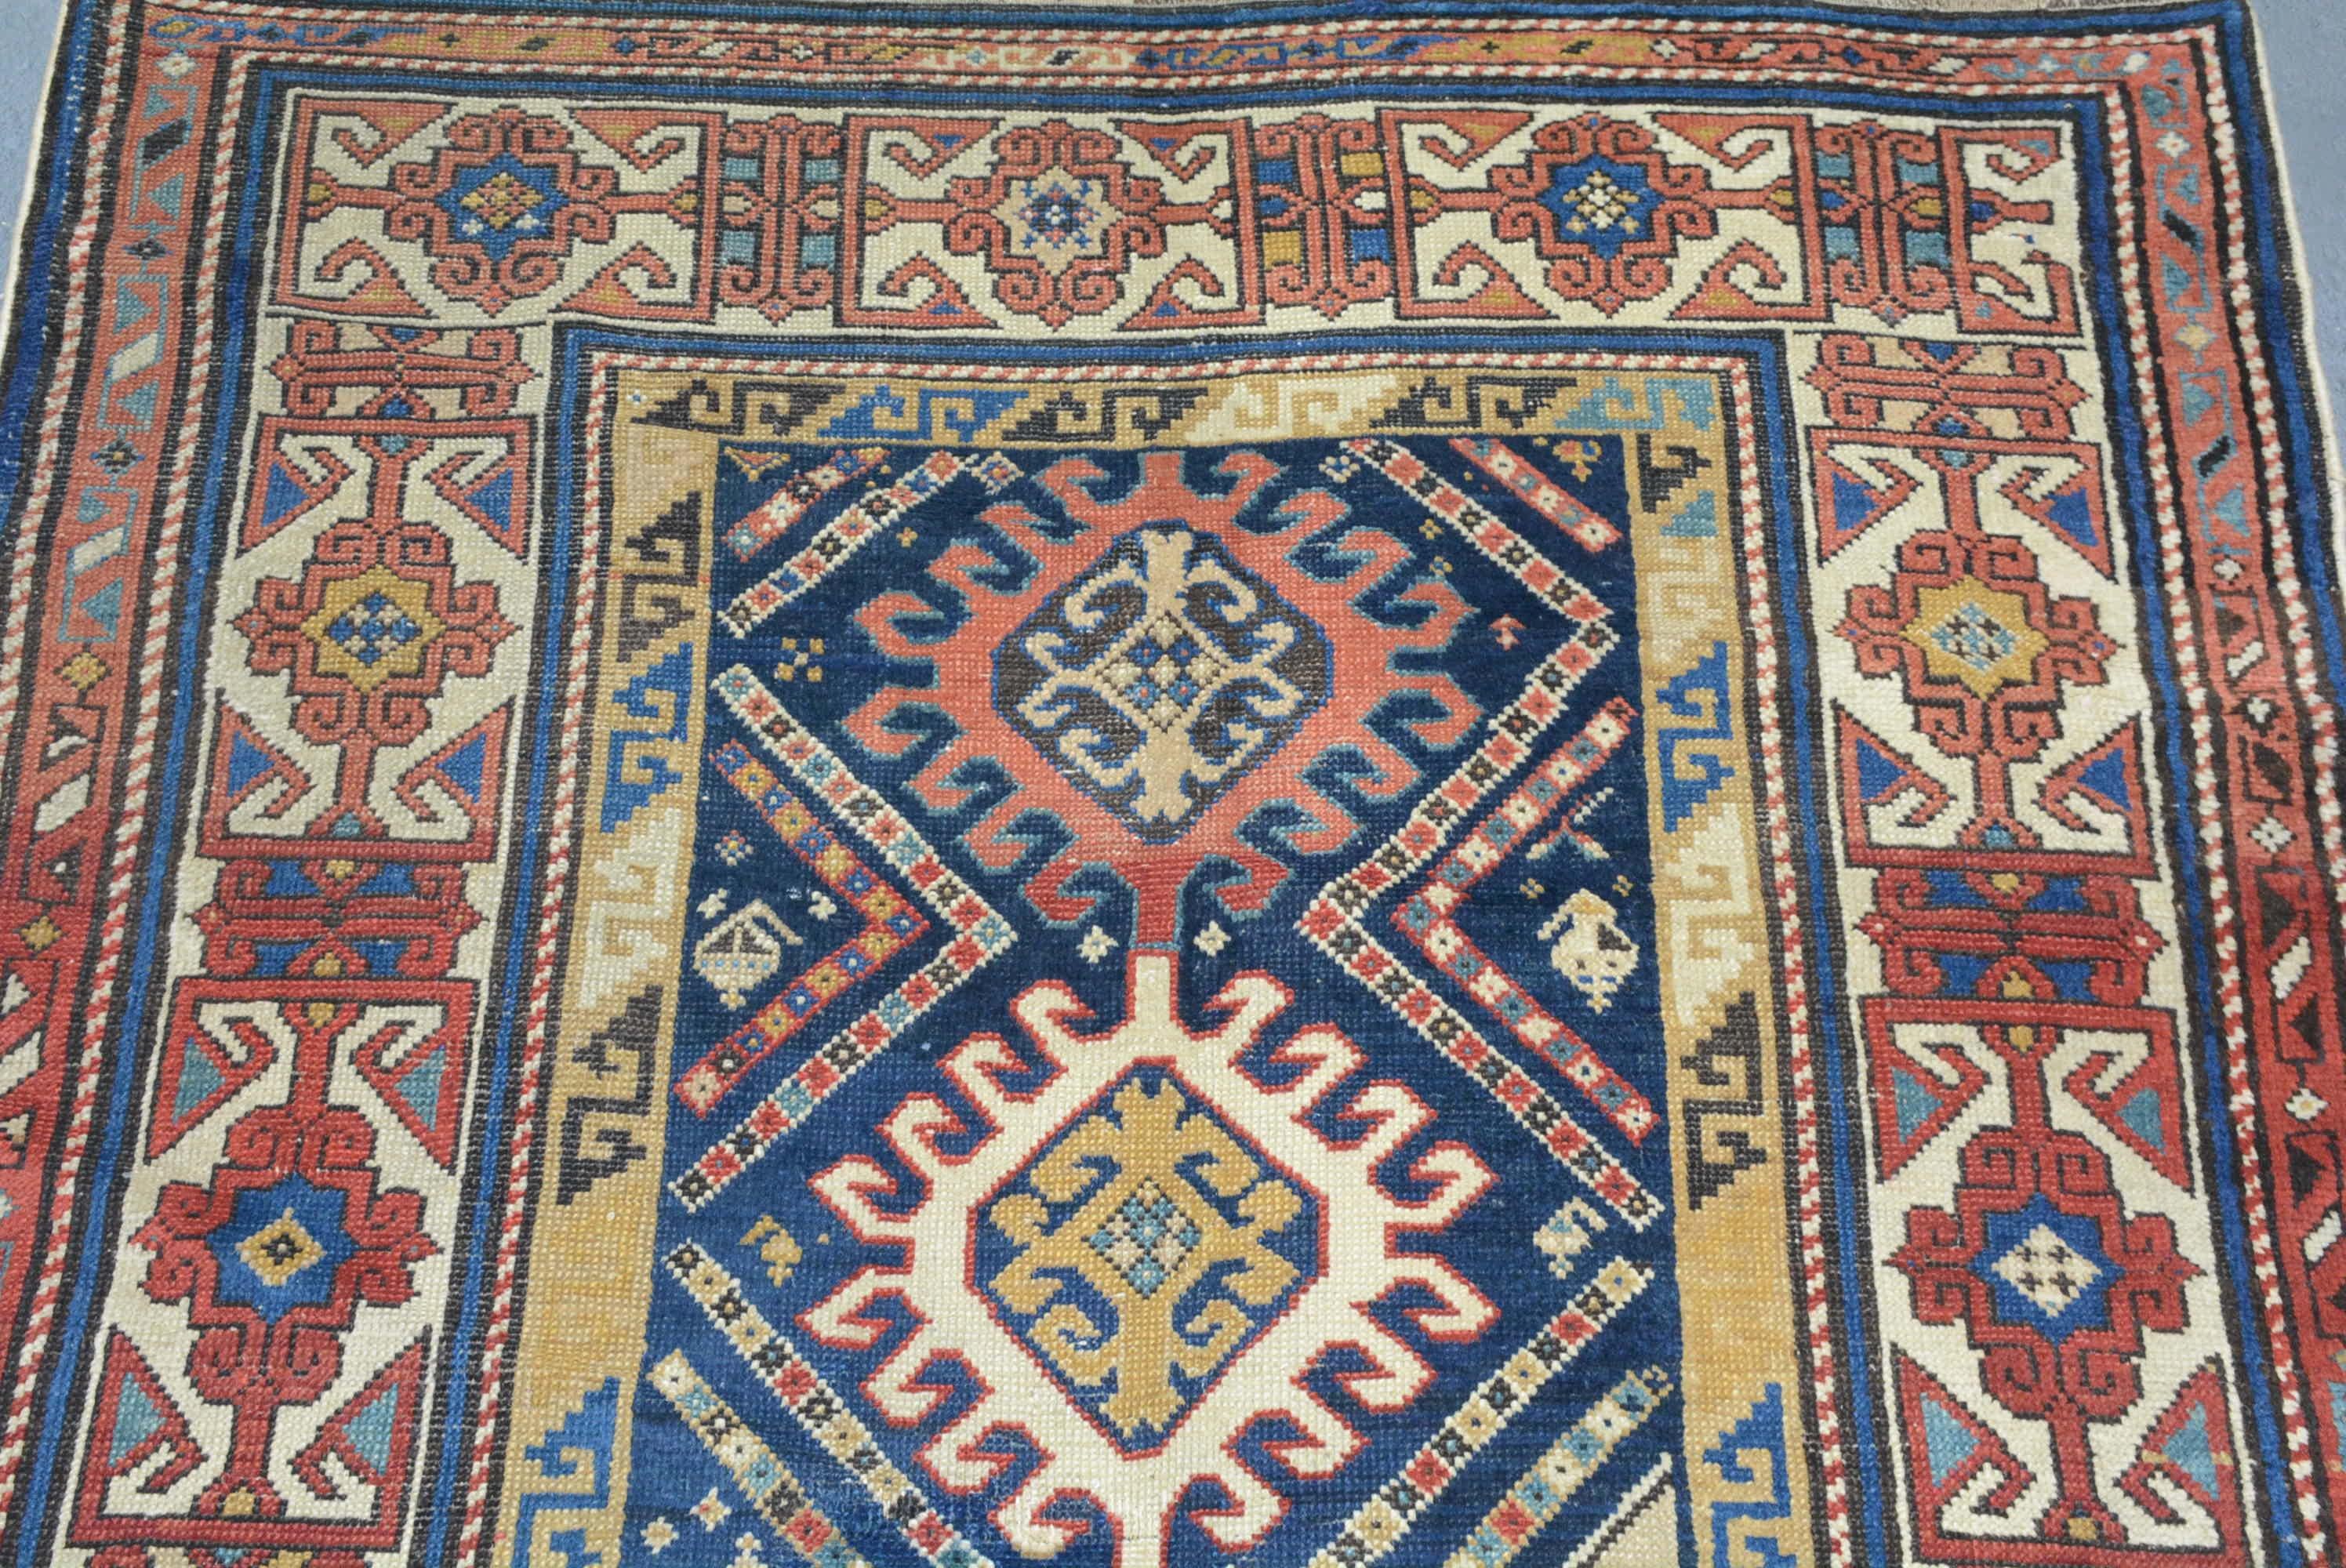 Kuba is the largest rug weaving center in the Caucasus region. Located in the northeast near the Caspian Sea, this area is known for producing rugs with medium-density, low piles on solid foundations. These rugs are often woven on indigo fields.